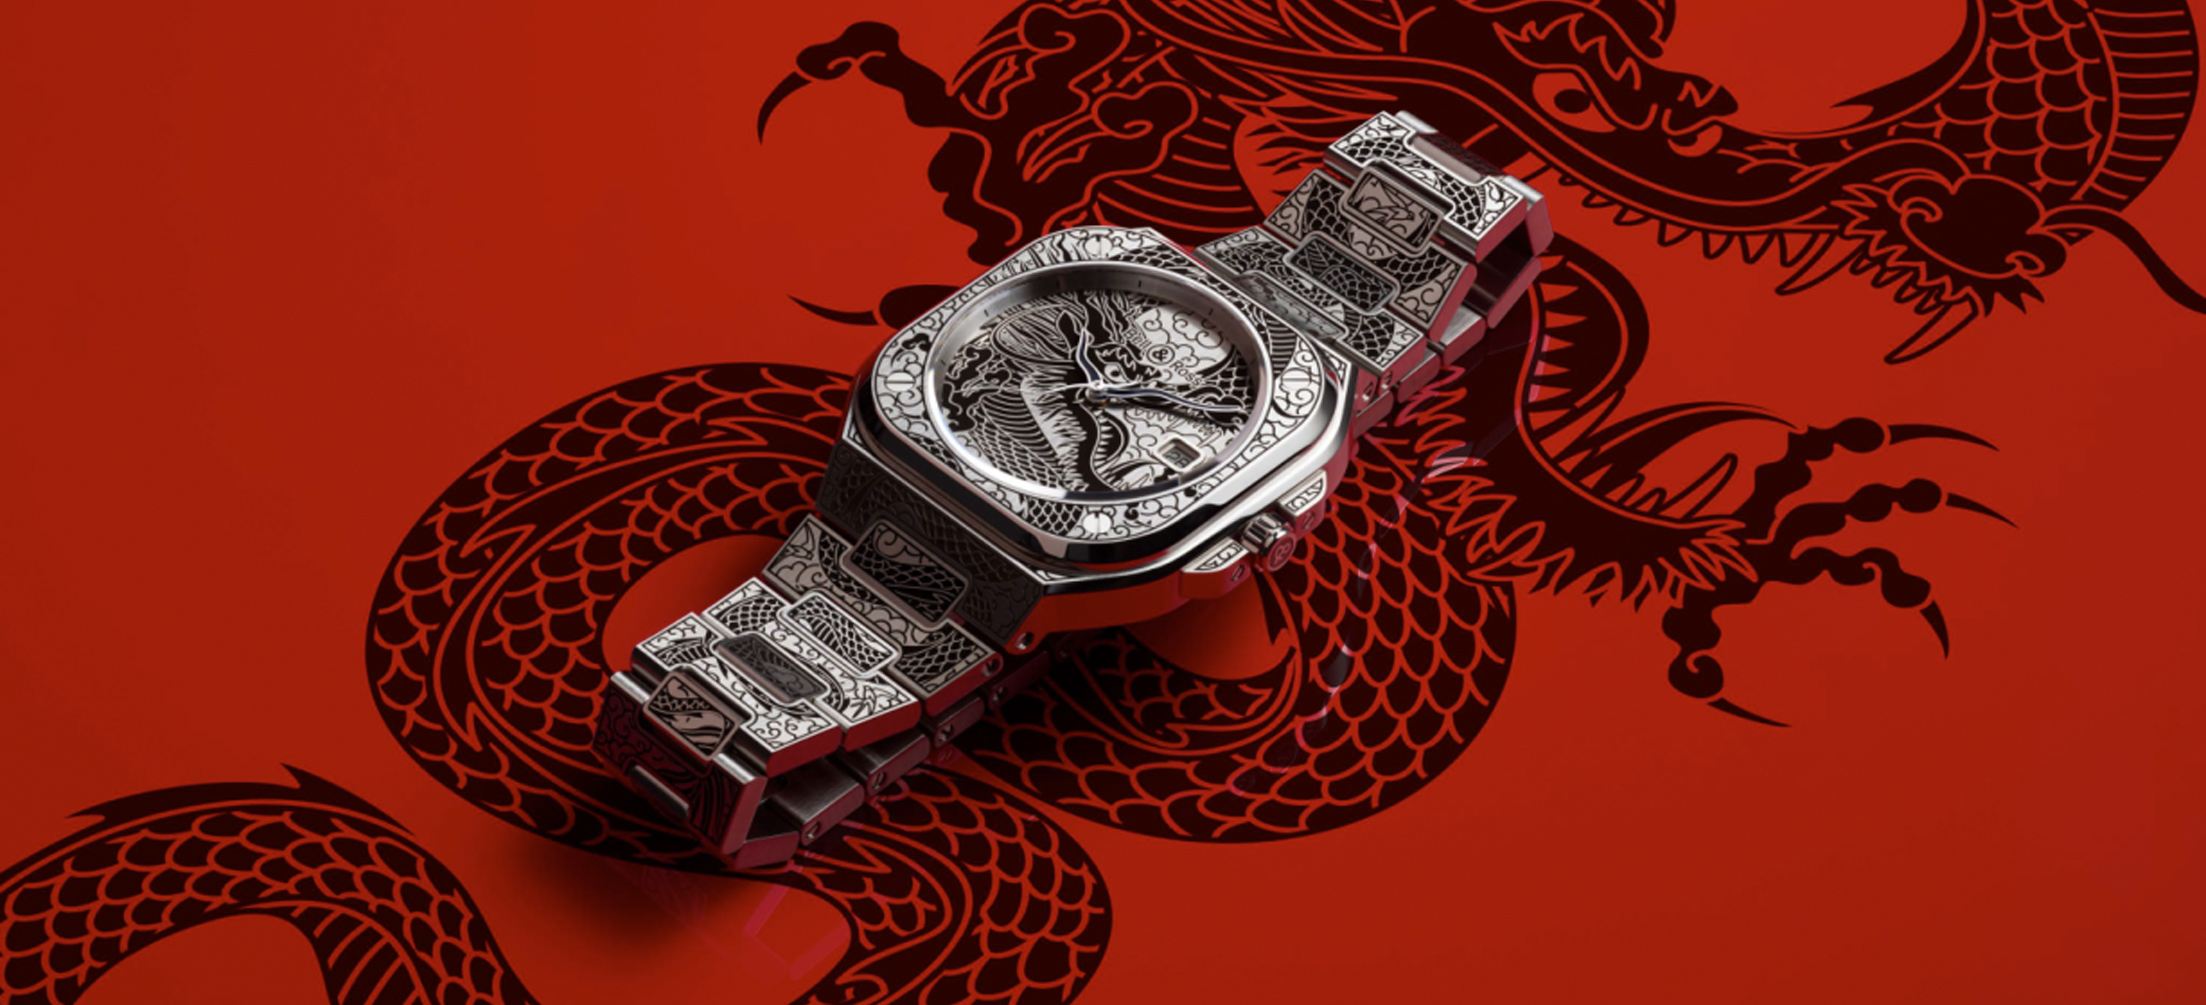 BELL & ROSS BR 05 Artline Dragon, Inspired by the Art of Tattooing